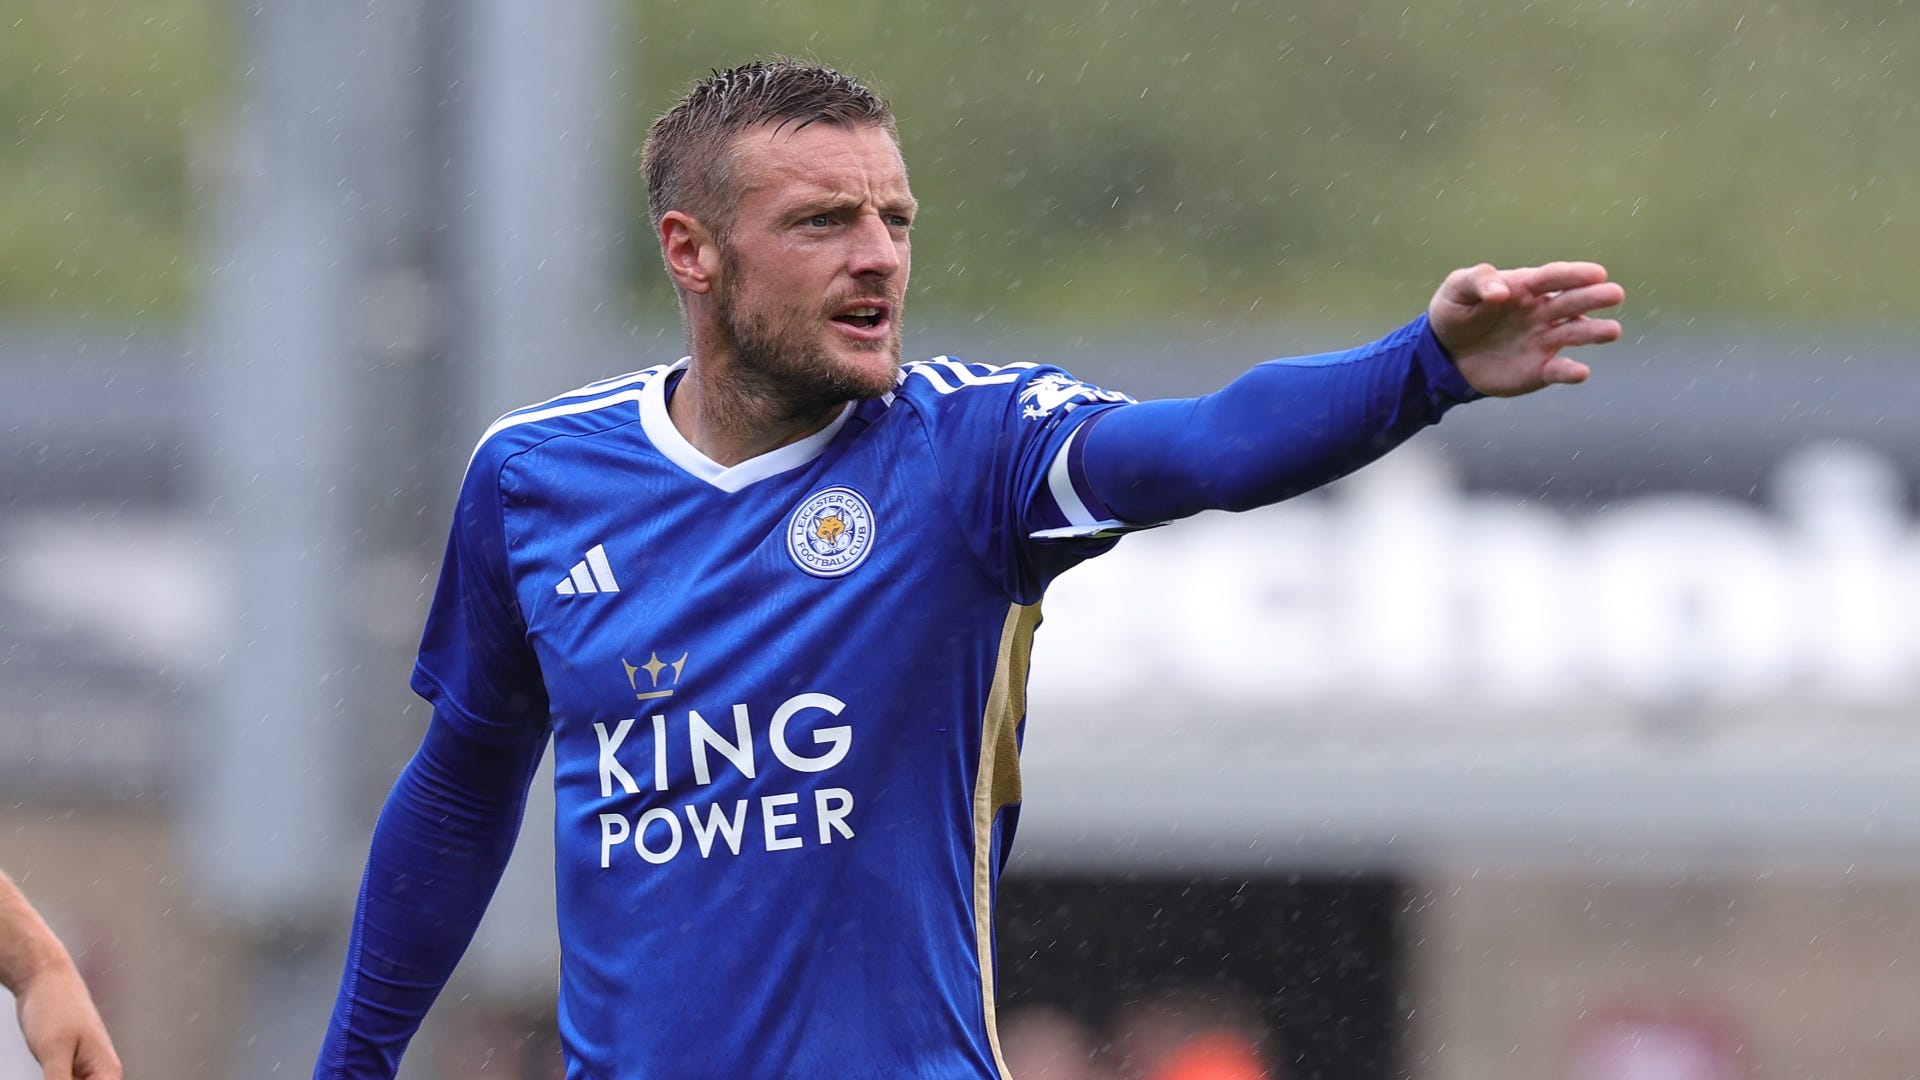 Leicester vs Coventry Live stream, TV channel, kick-off time and where to watch Goal UK